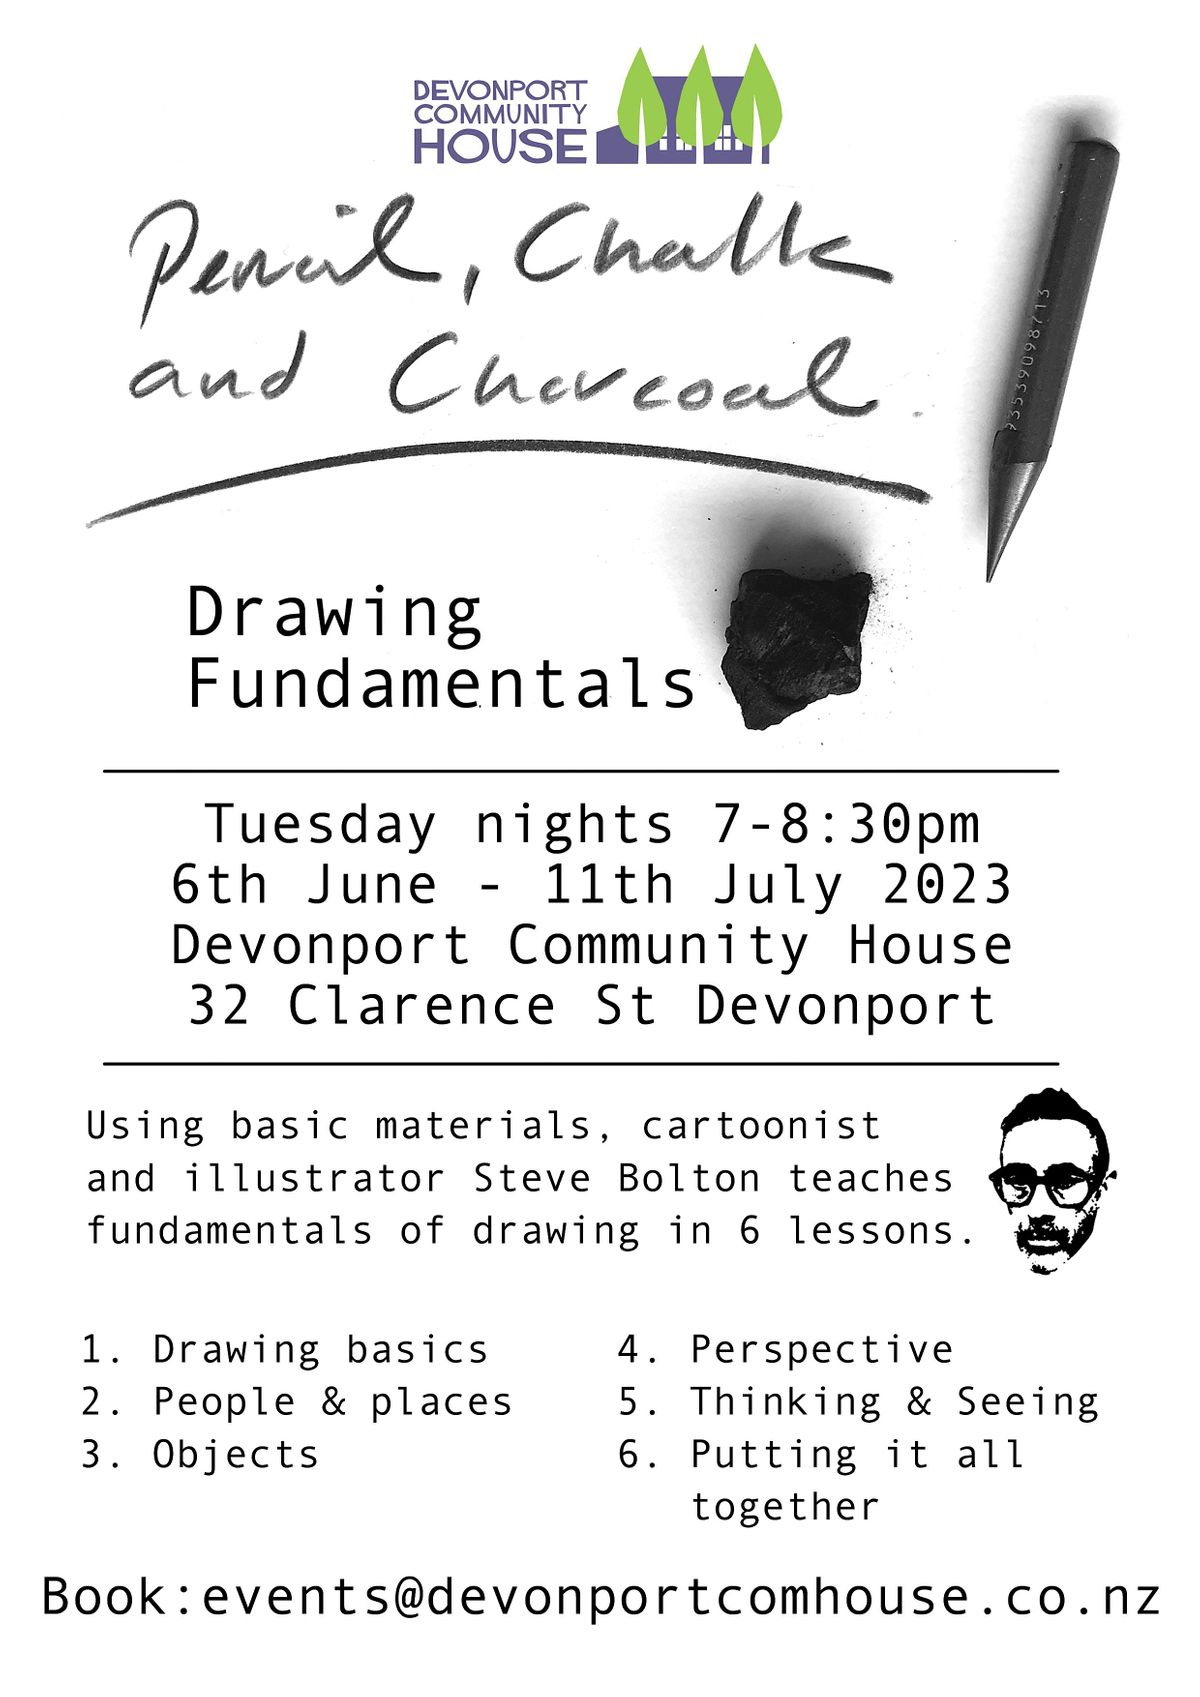 Drawing Fundamentals - 6 week Tuesday evening course of  in Devonport